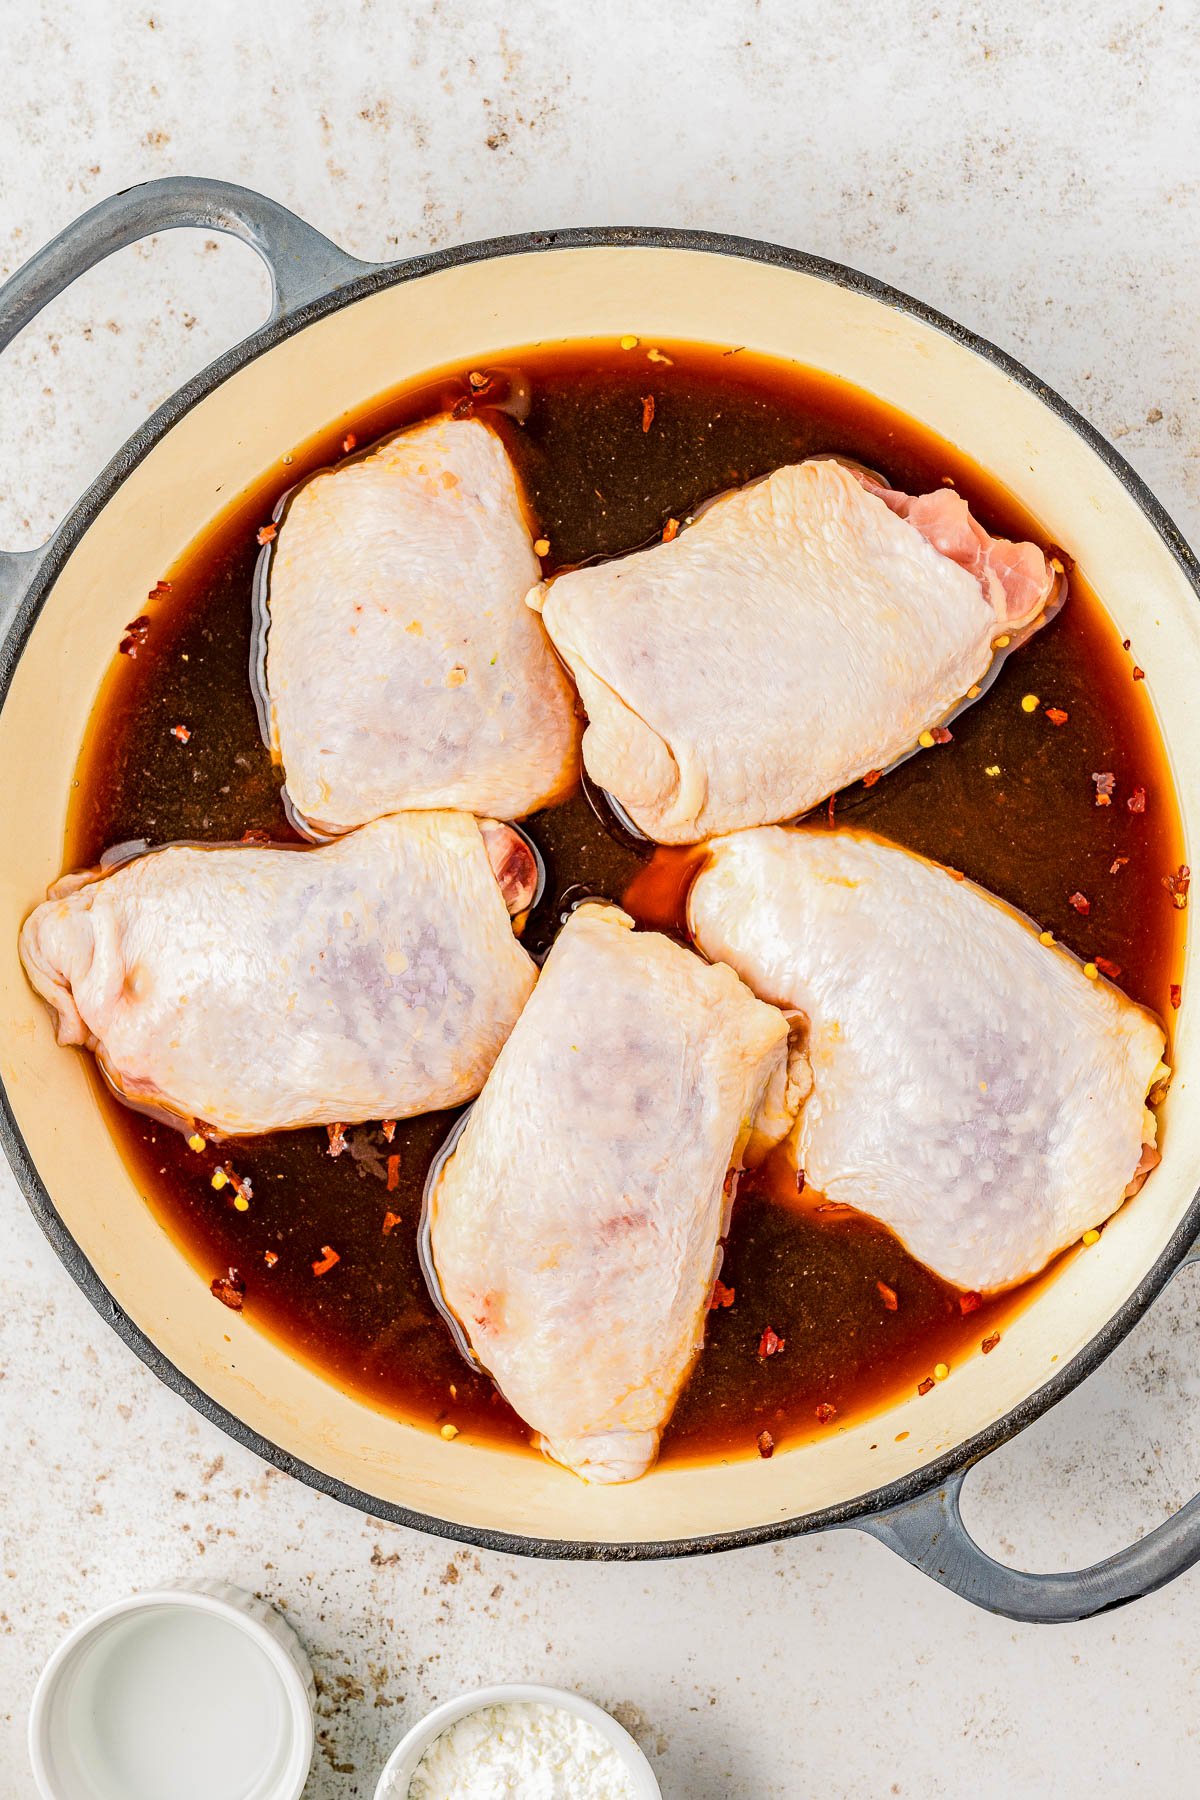 Raw chicken thighs marinating in a spiced sauce in a large pan, viewed from above.